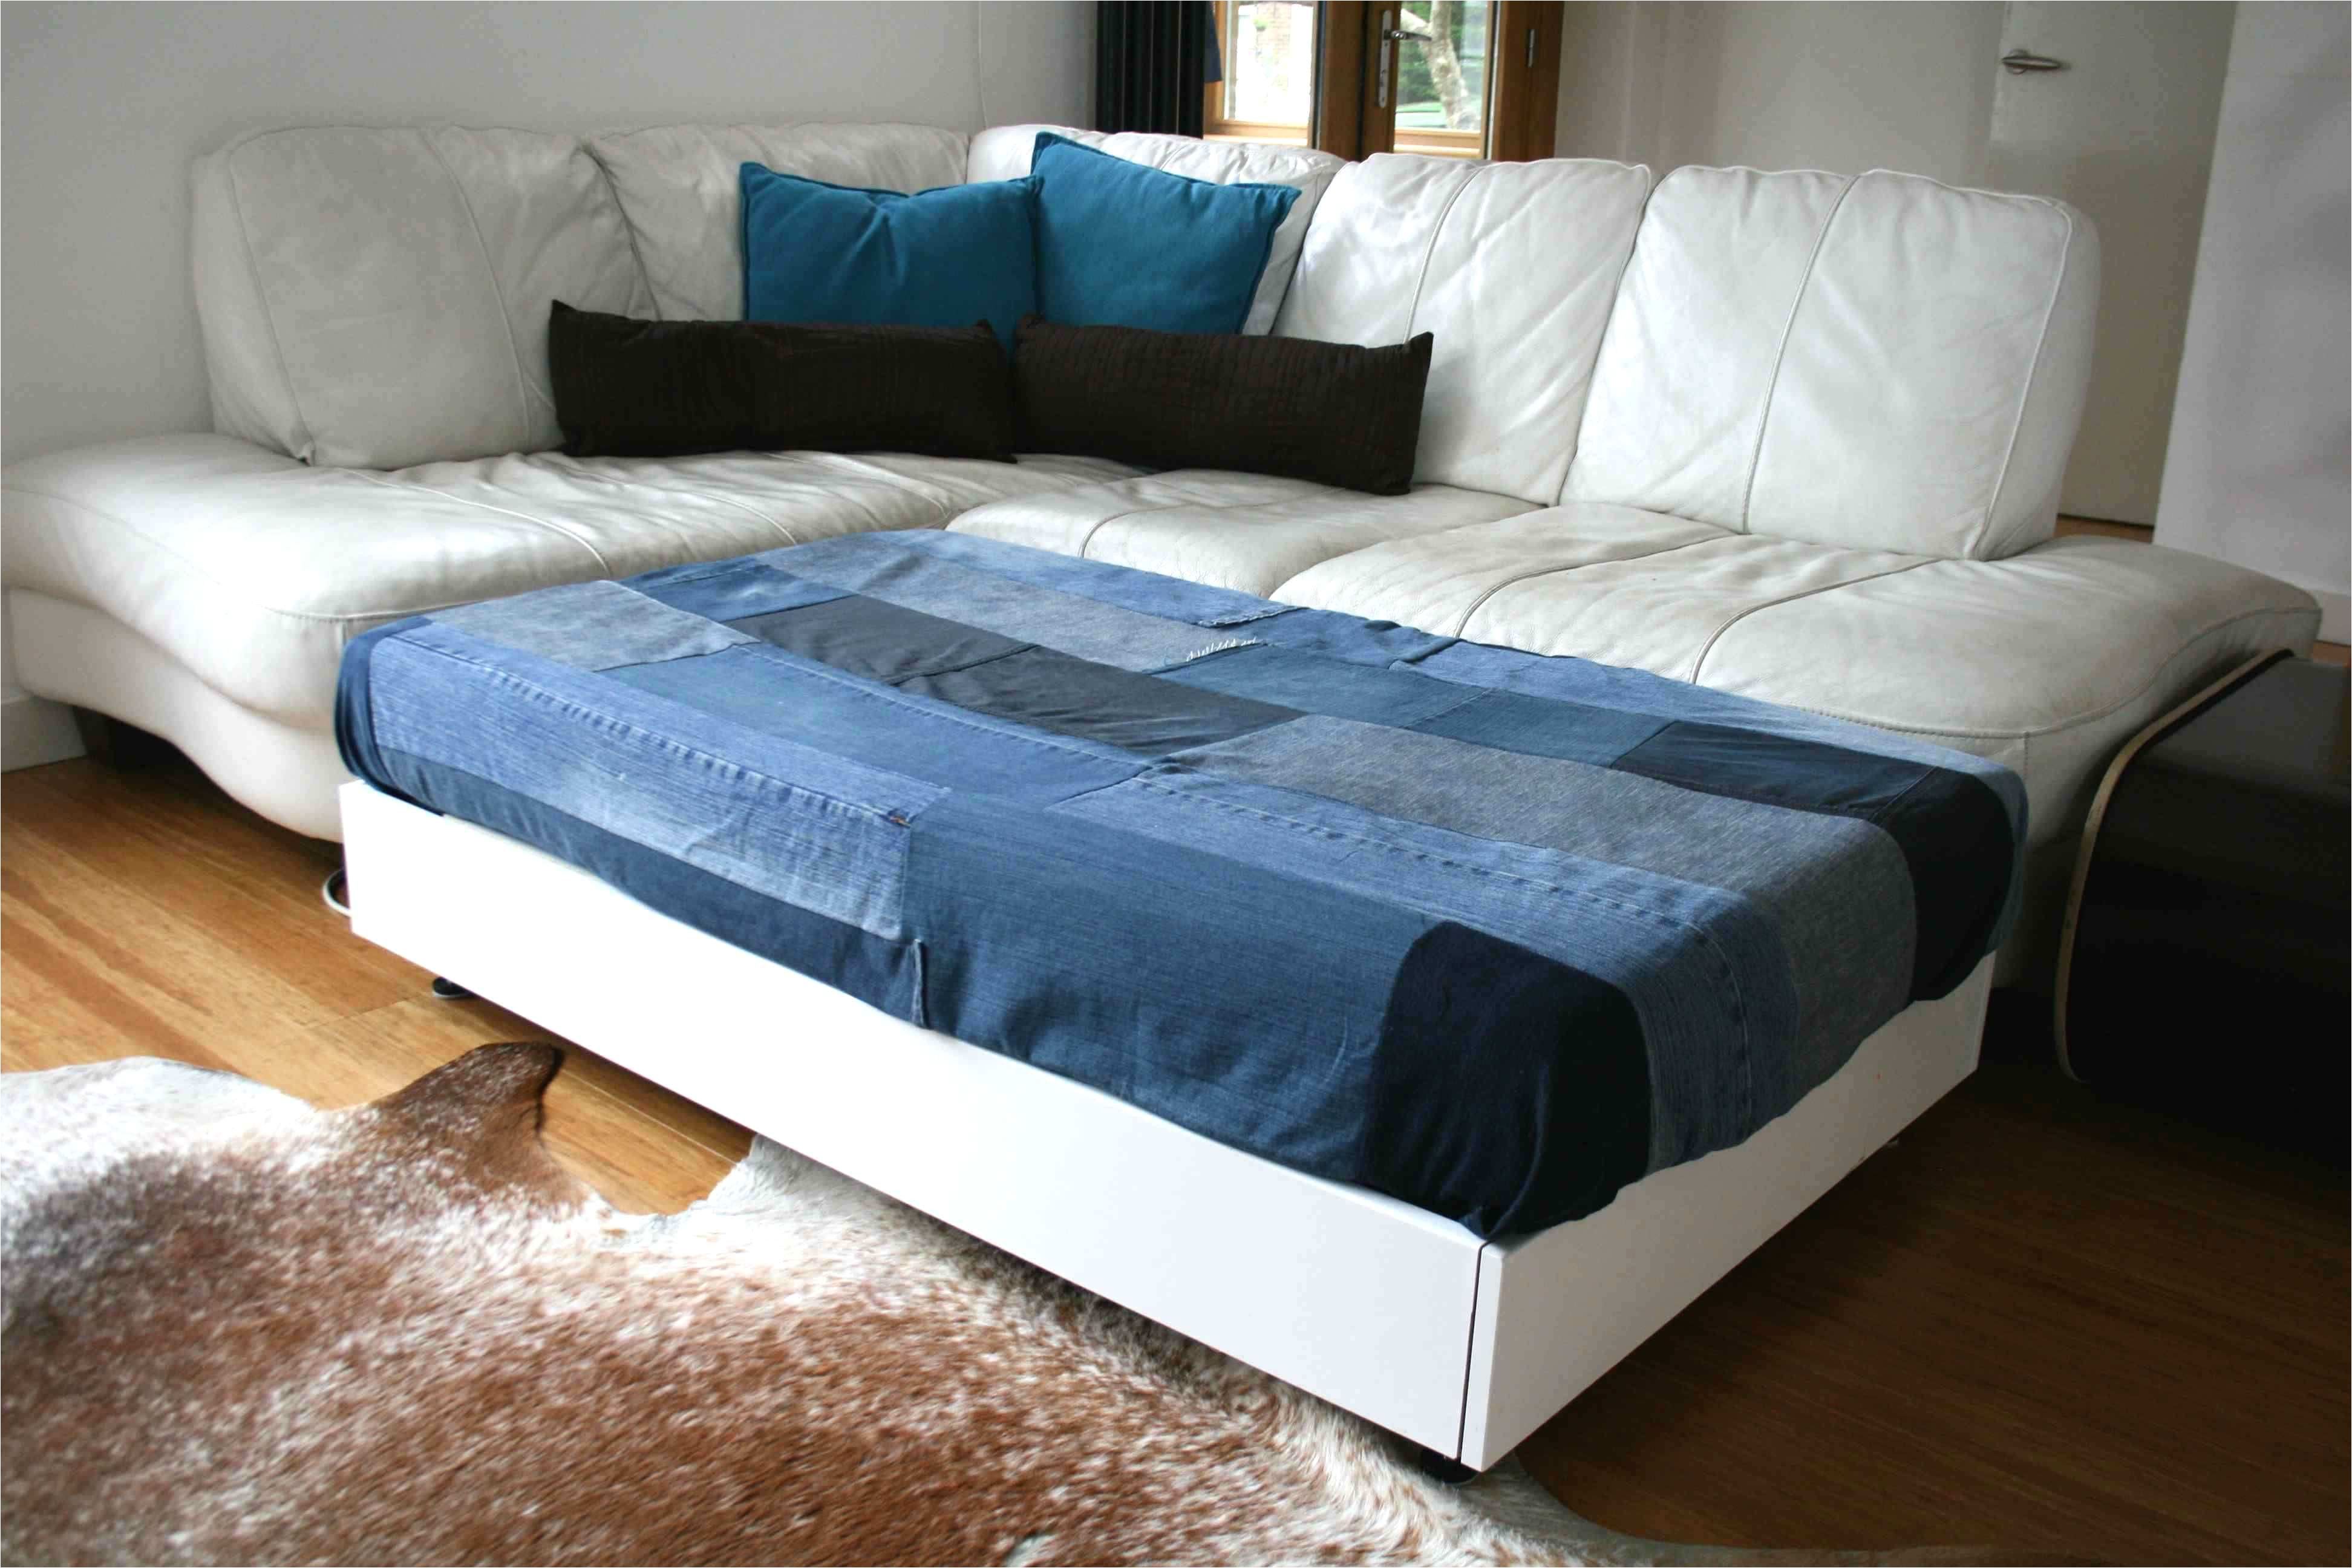 diy sofa family bed with upcycled denim cover luz patterns of simple sam amp 039